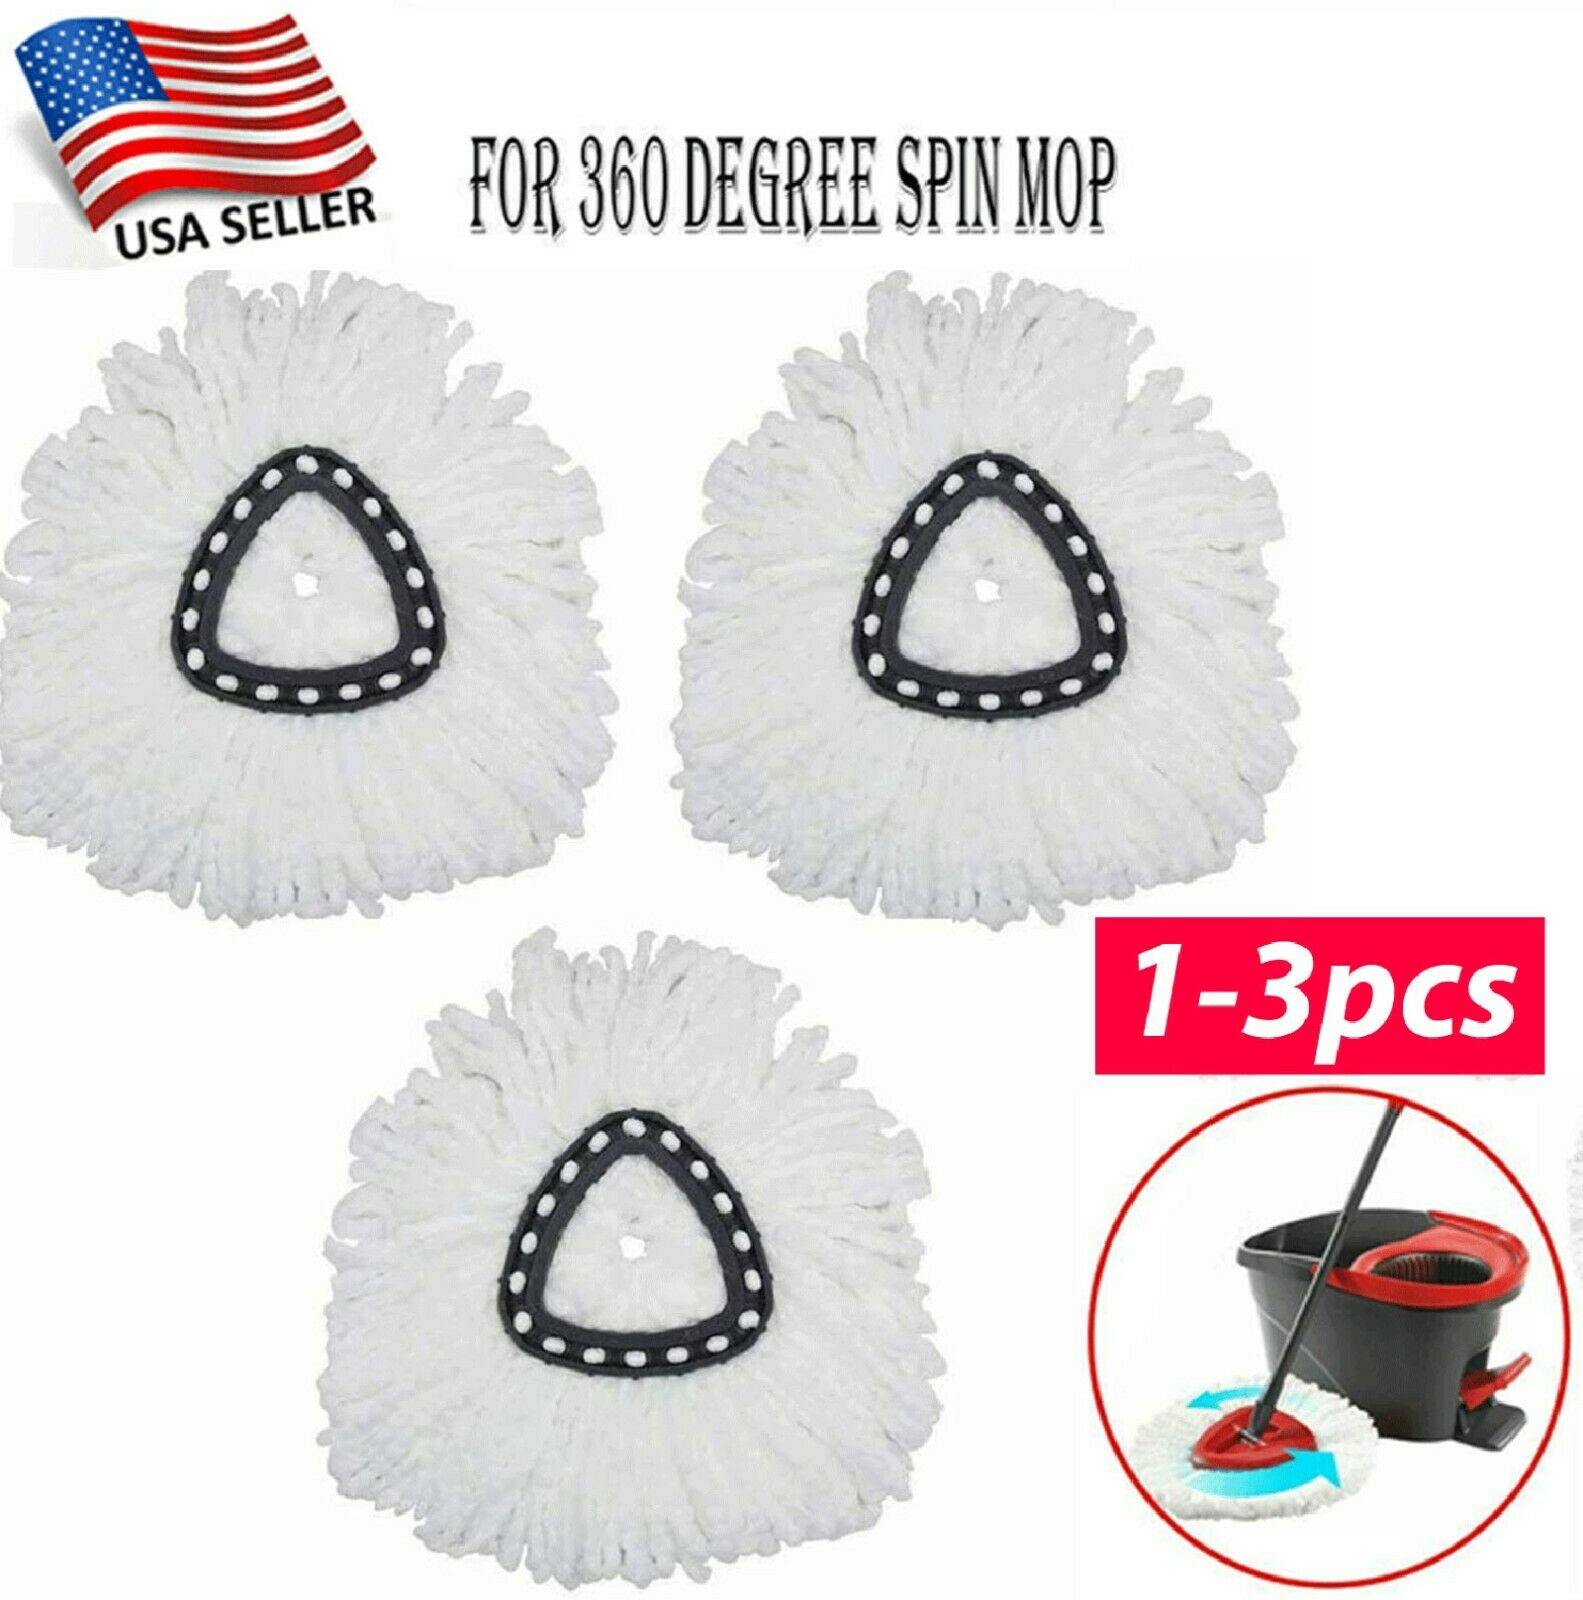 Replacement Microfiber Mop HEAD For O-Cedar Spin Mop Easy Clean Wring Refill